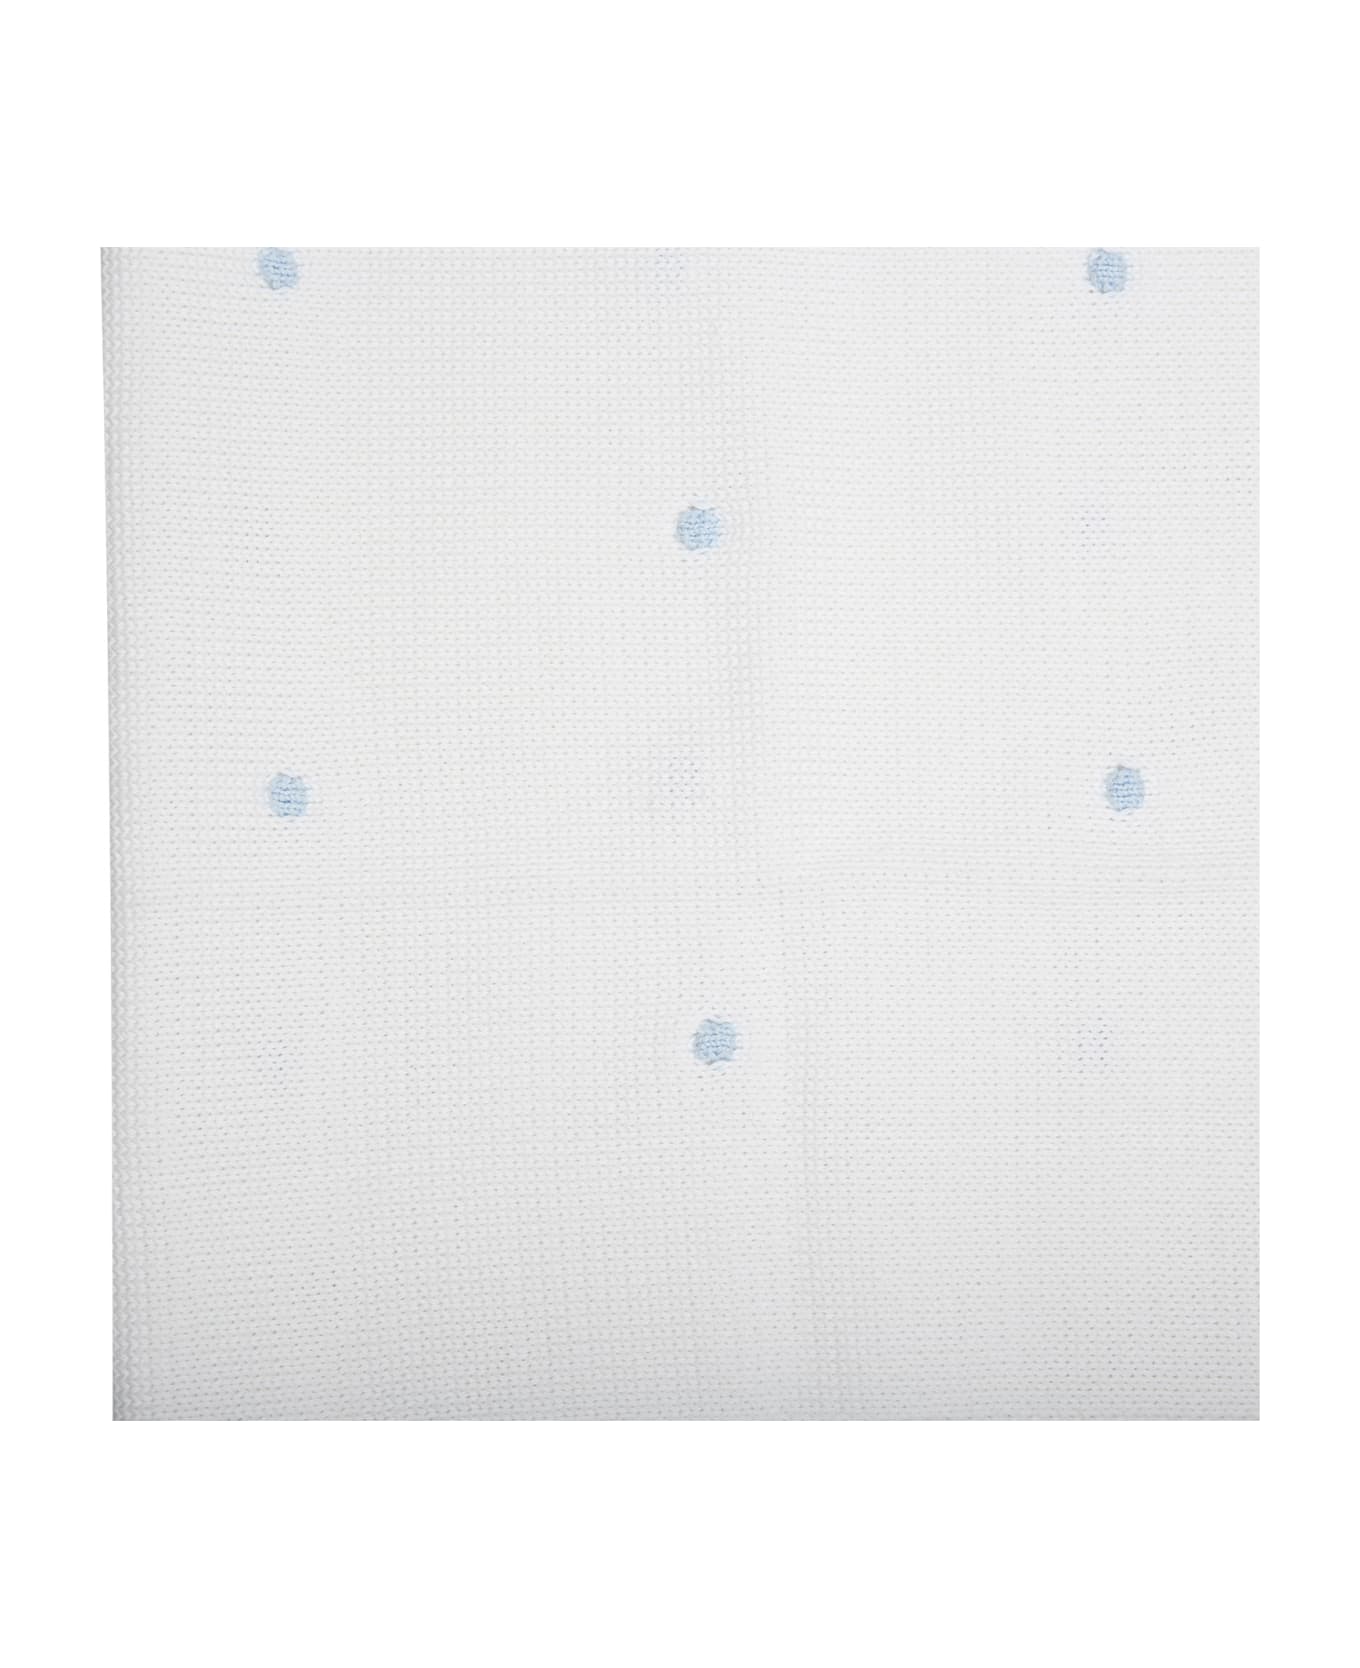 Little Bear White Baby Blanket For Baby Boy With Sky Blue Polka Dots - White アクセサリー＆ギフト